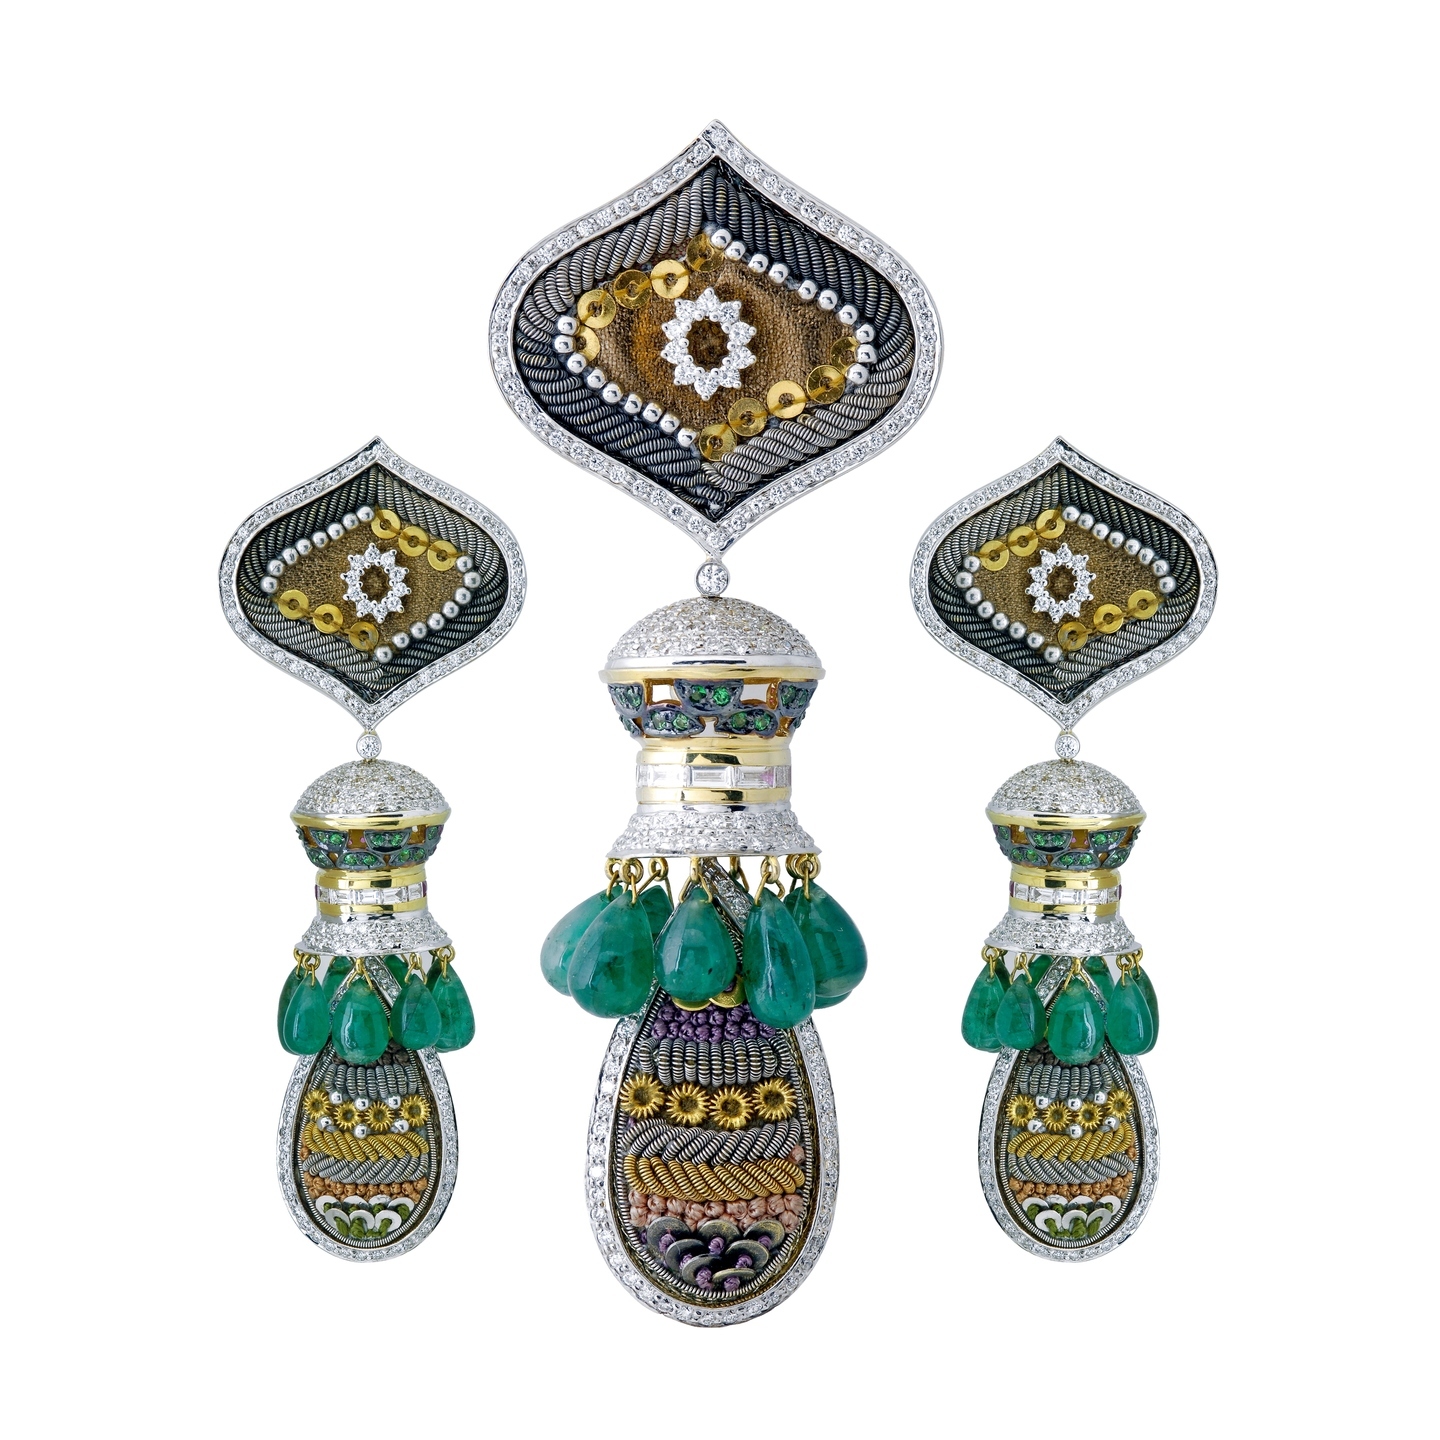 An exquisite woven pendant set ,enriched with embroidered precious elements boasting of with multifunctional wearability.